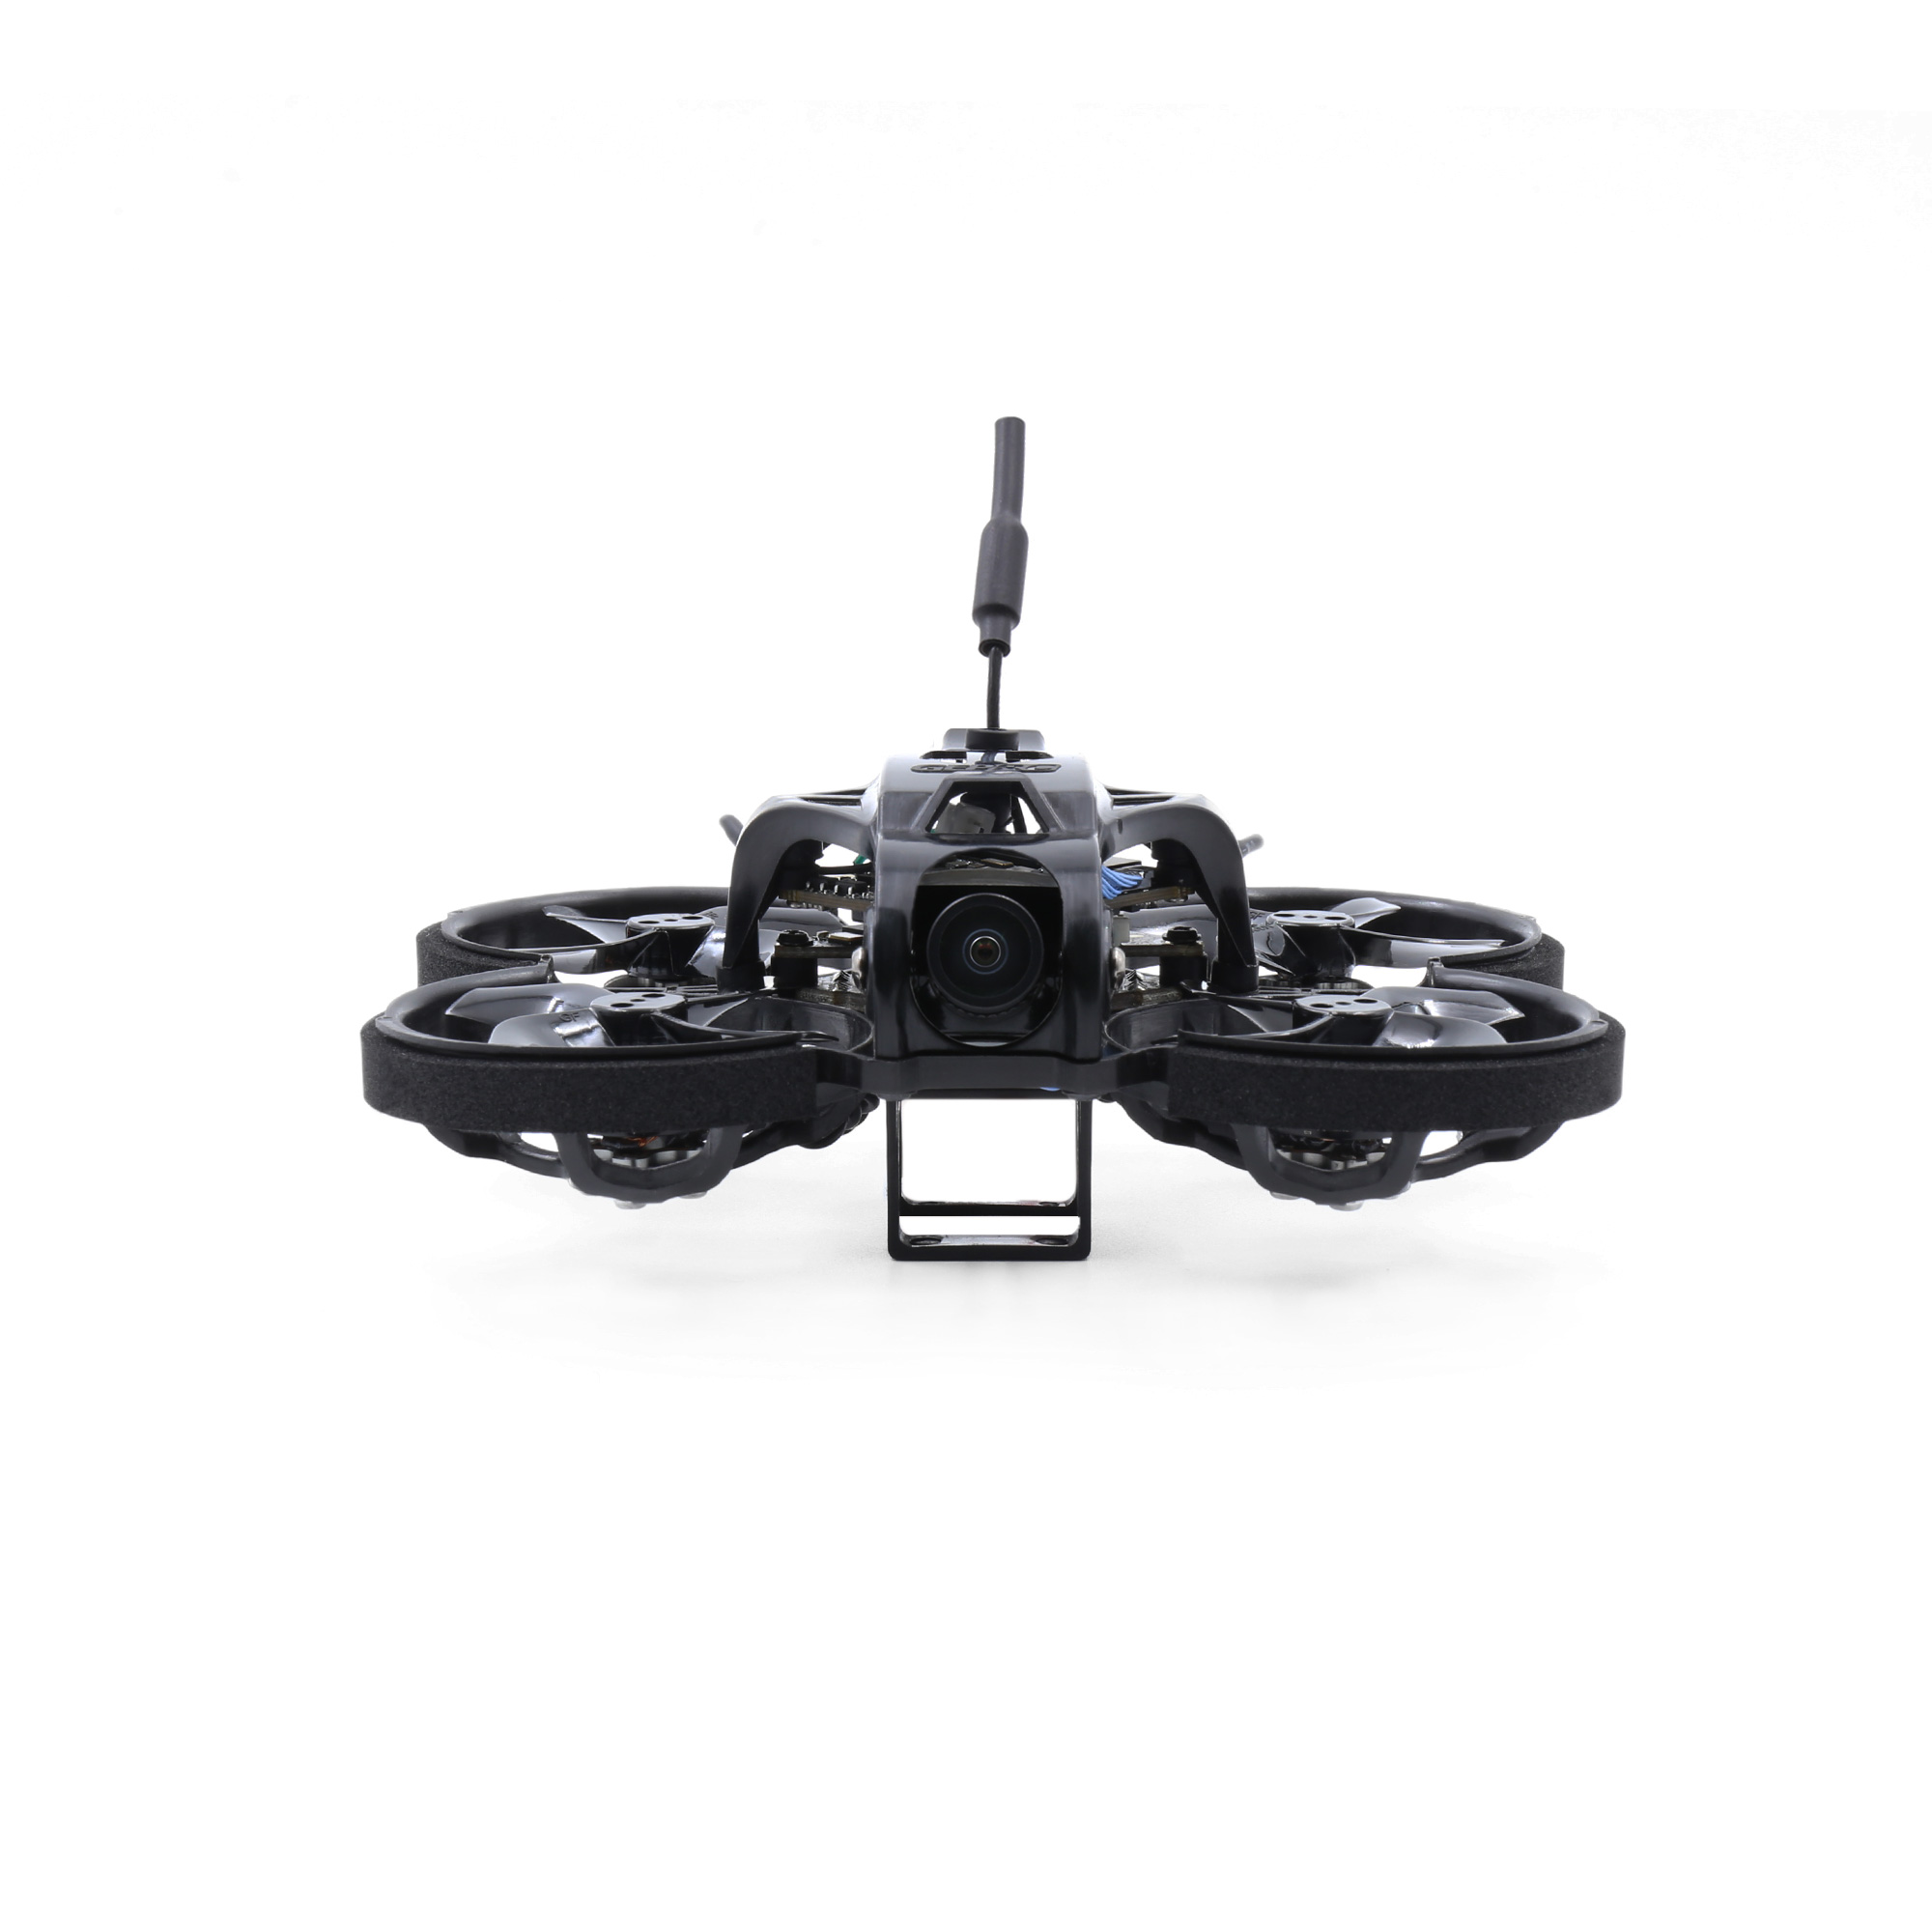 GEPRC TinyGO 1.6inch 2S 4K Caddx Loris FPV Indoor Whoop+GR8 Remote Controller+RG1 Goggles RTF Ready To Fly FPV Racing RC Drone 7